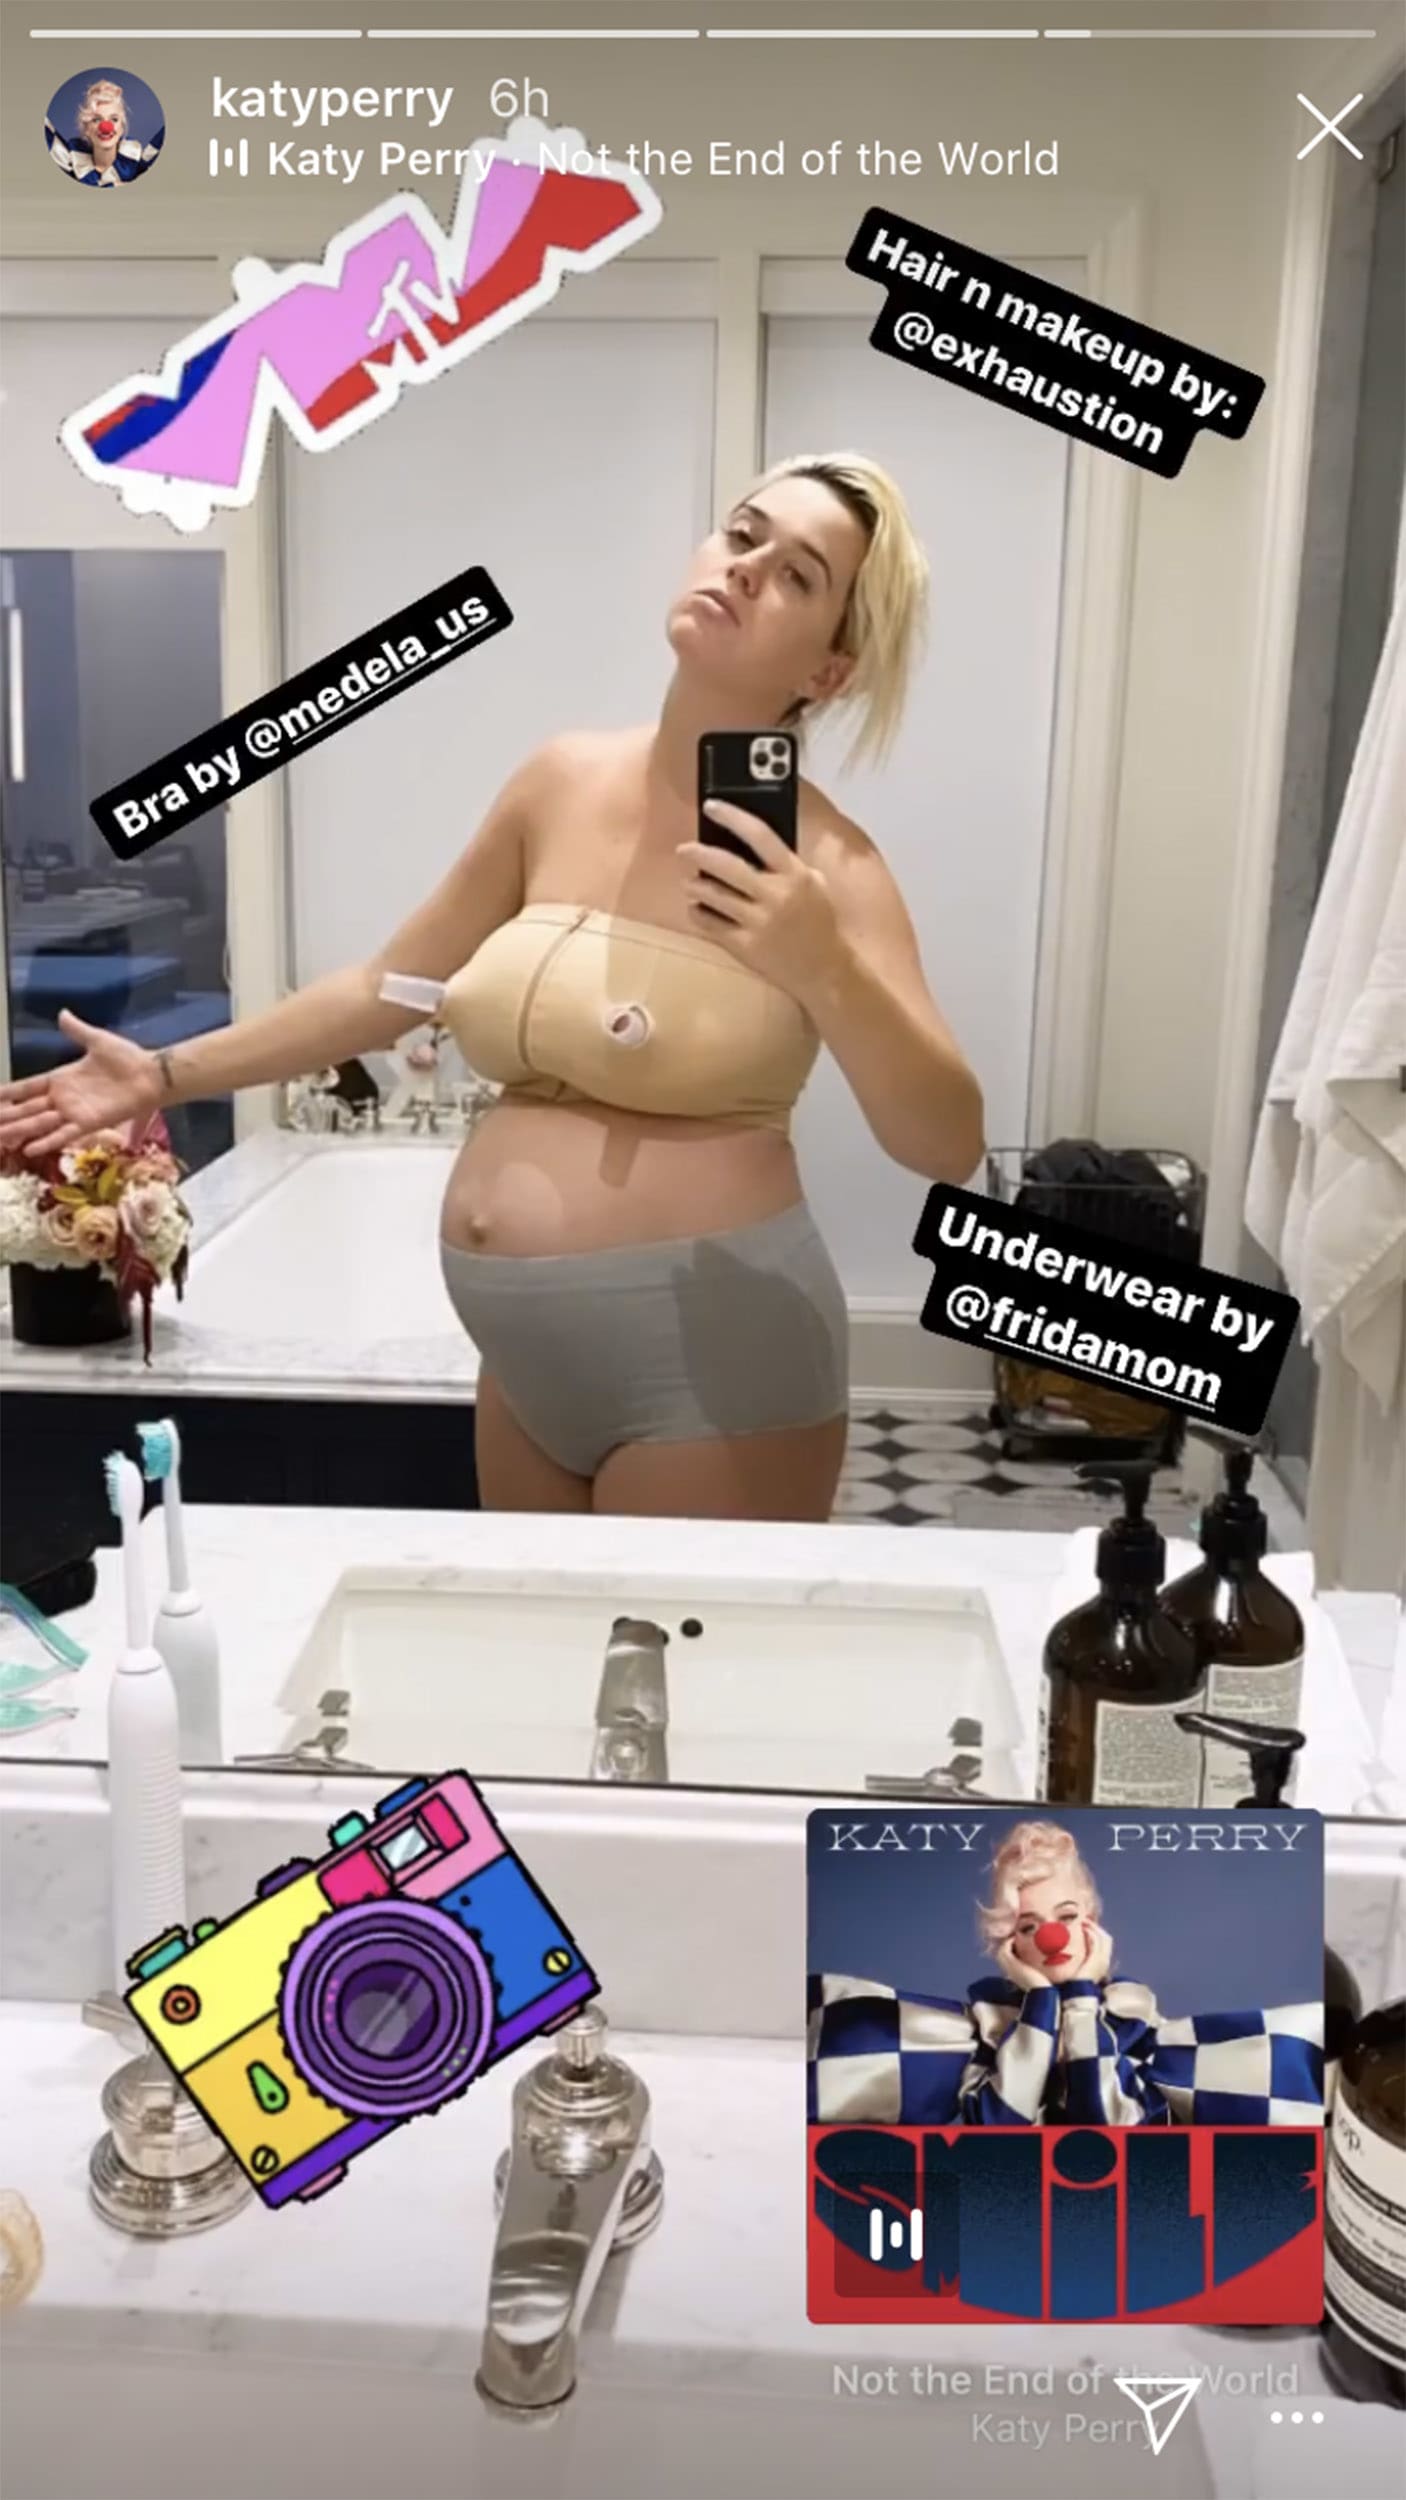 Katy Perry Porn - Katy Perry posts pic in nursing bra days after having baby